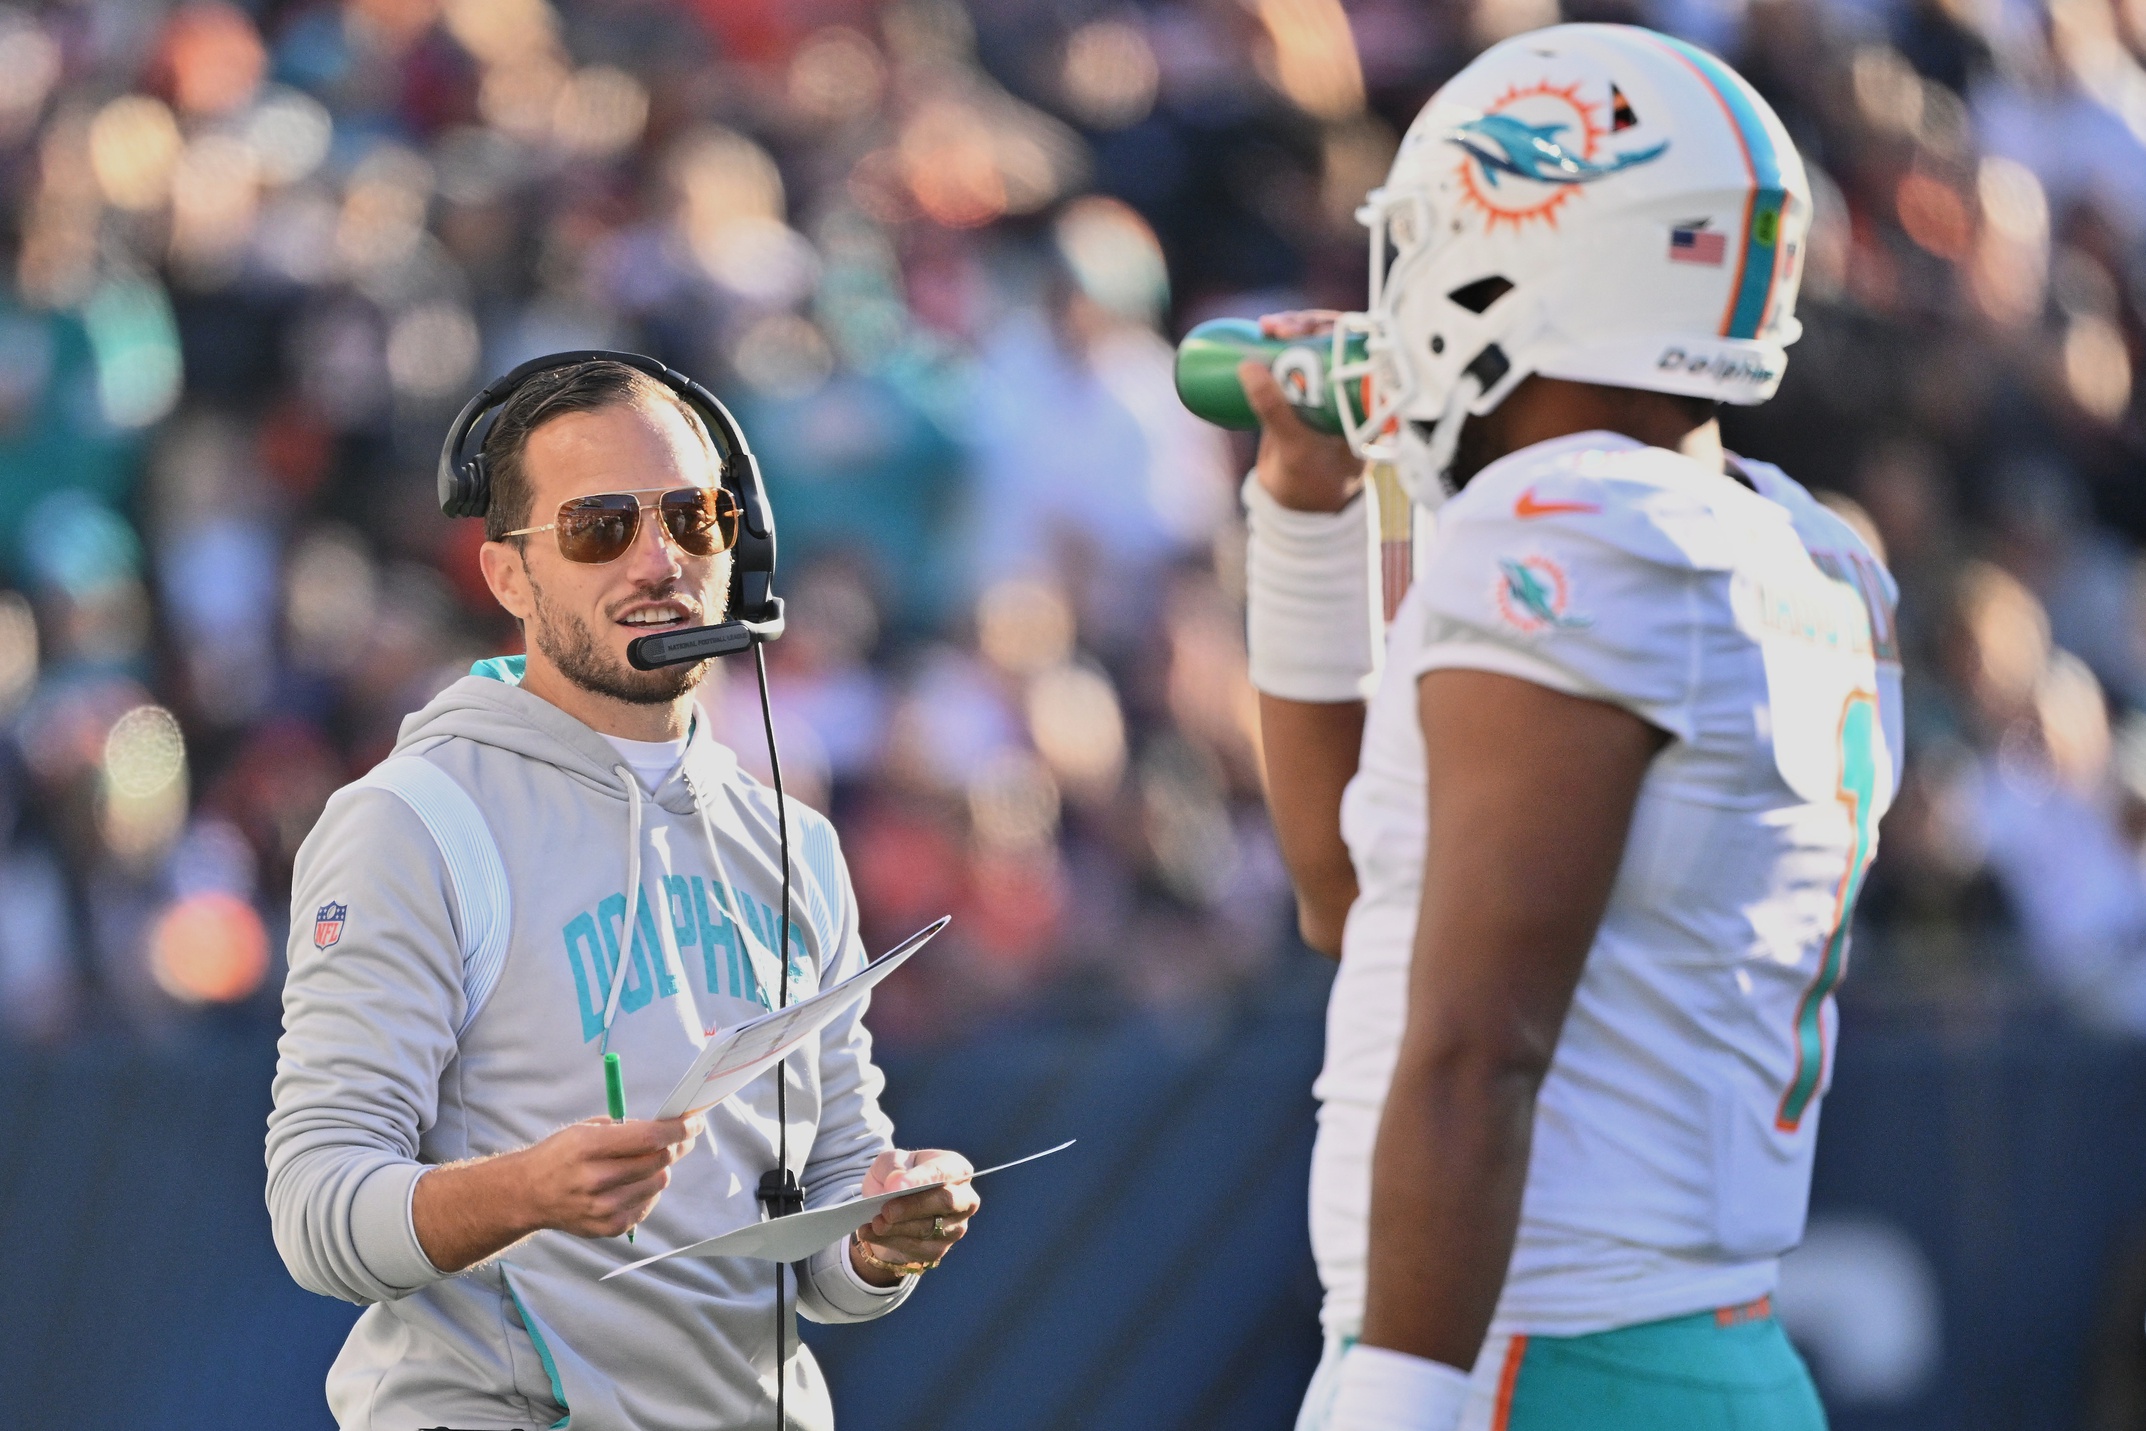 www miamidolphins com schedule